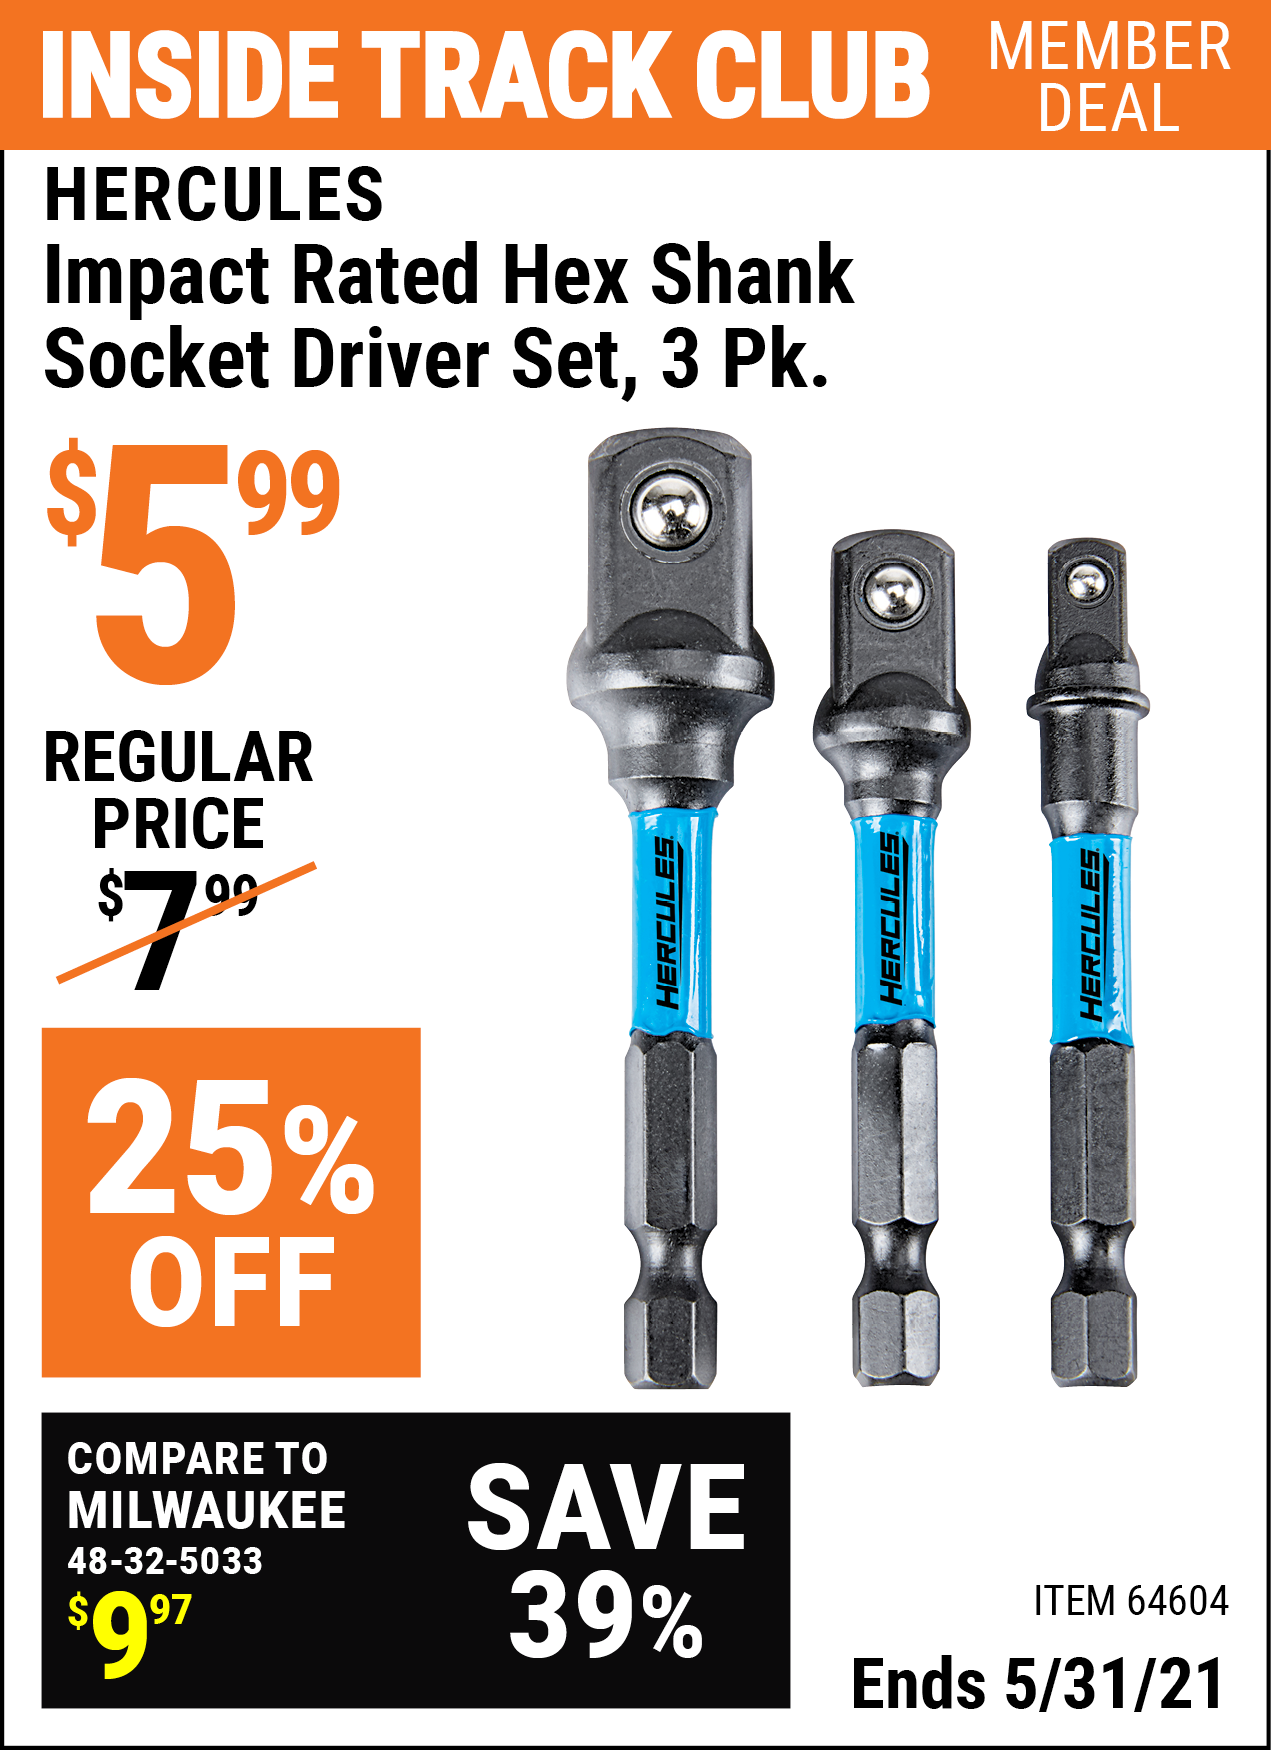 Inside Track Club members can buy the HERCULES Impact Rated Hex Shank Socket Driver Set 3 Pk. (Item 64604) for $5.99, valid through 5/31/2021.